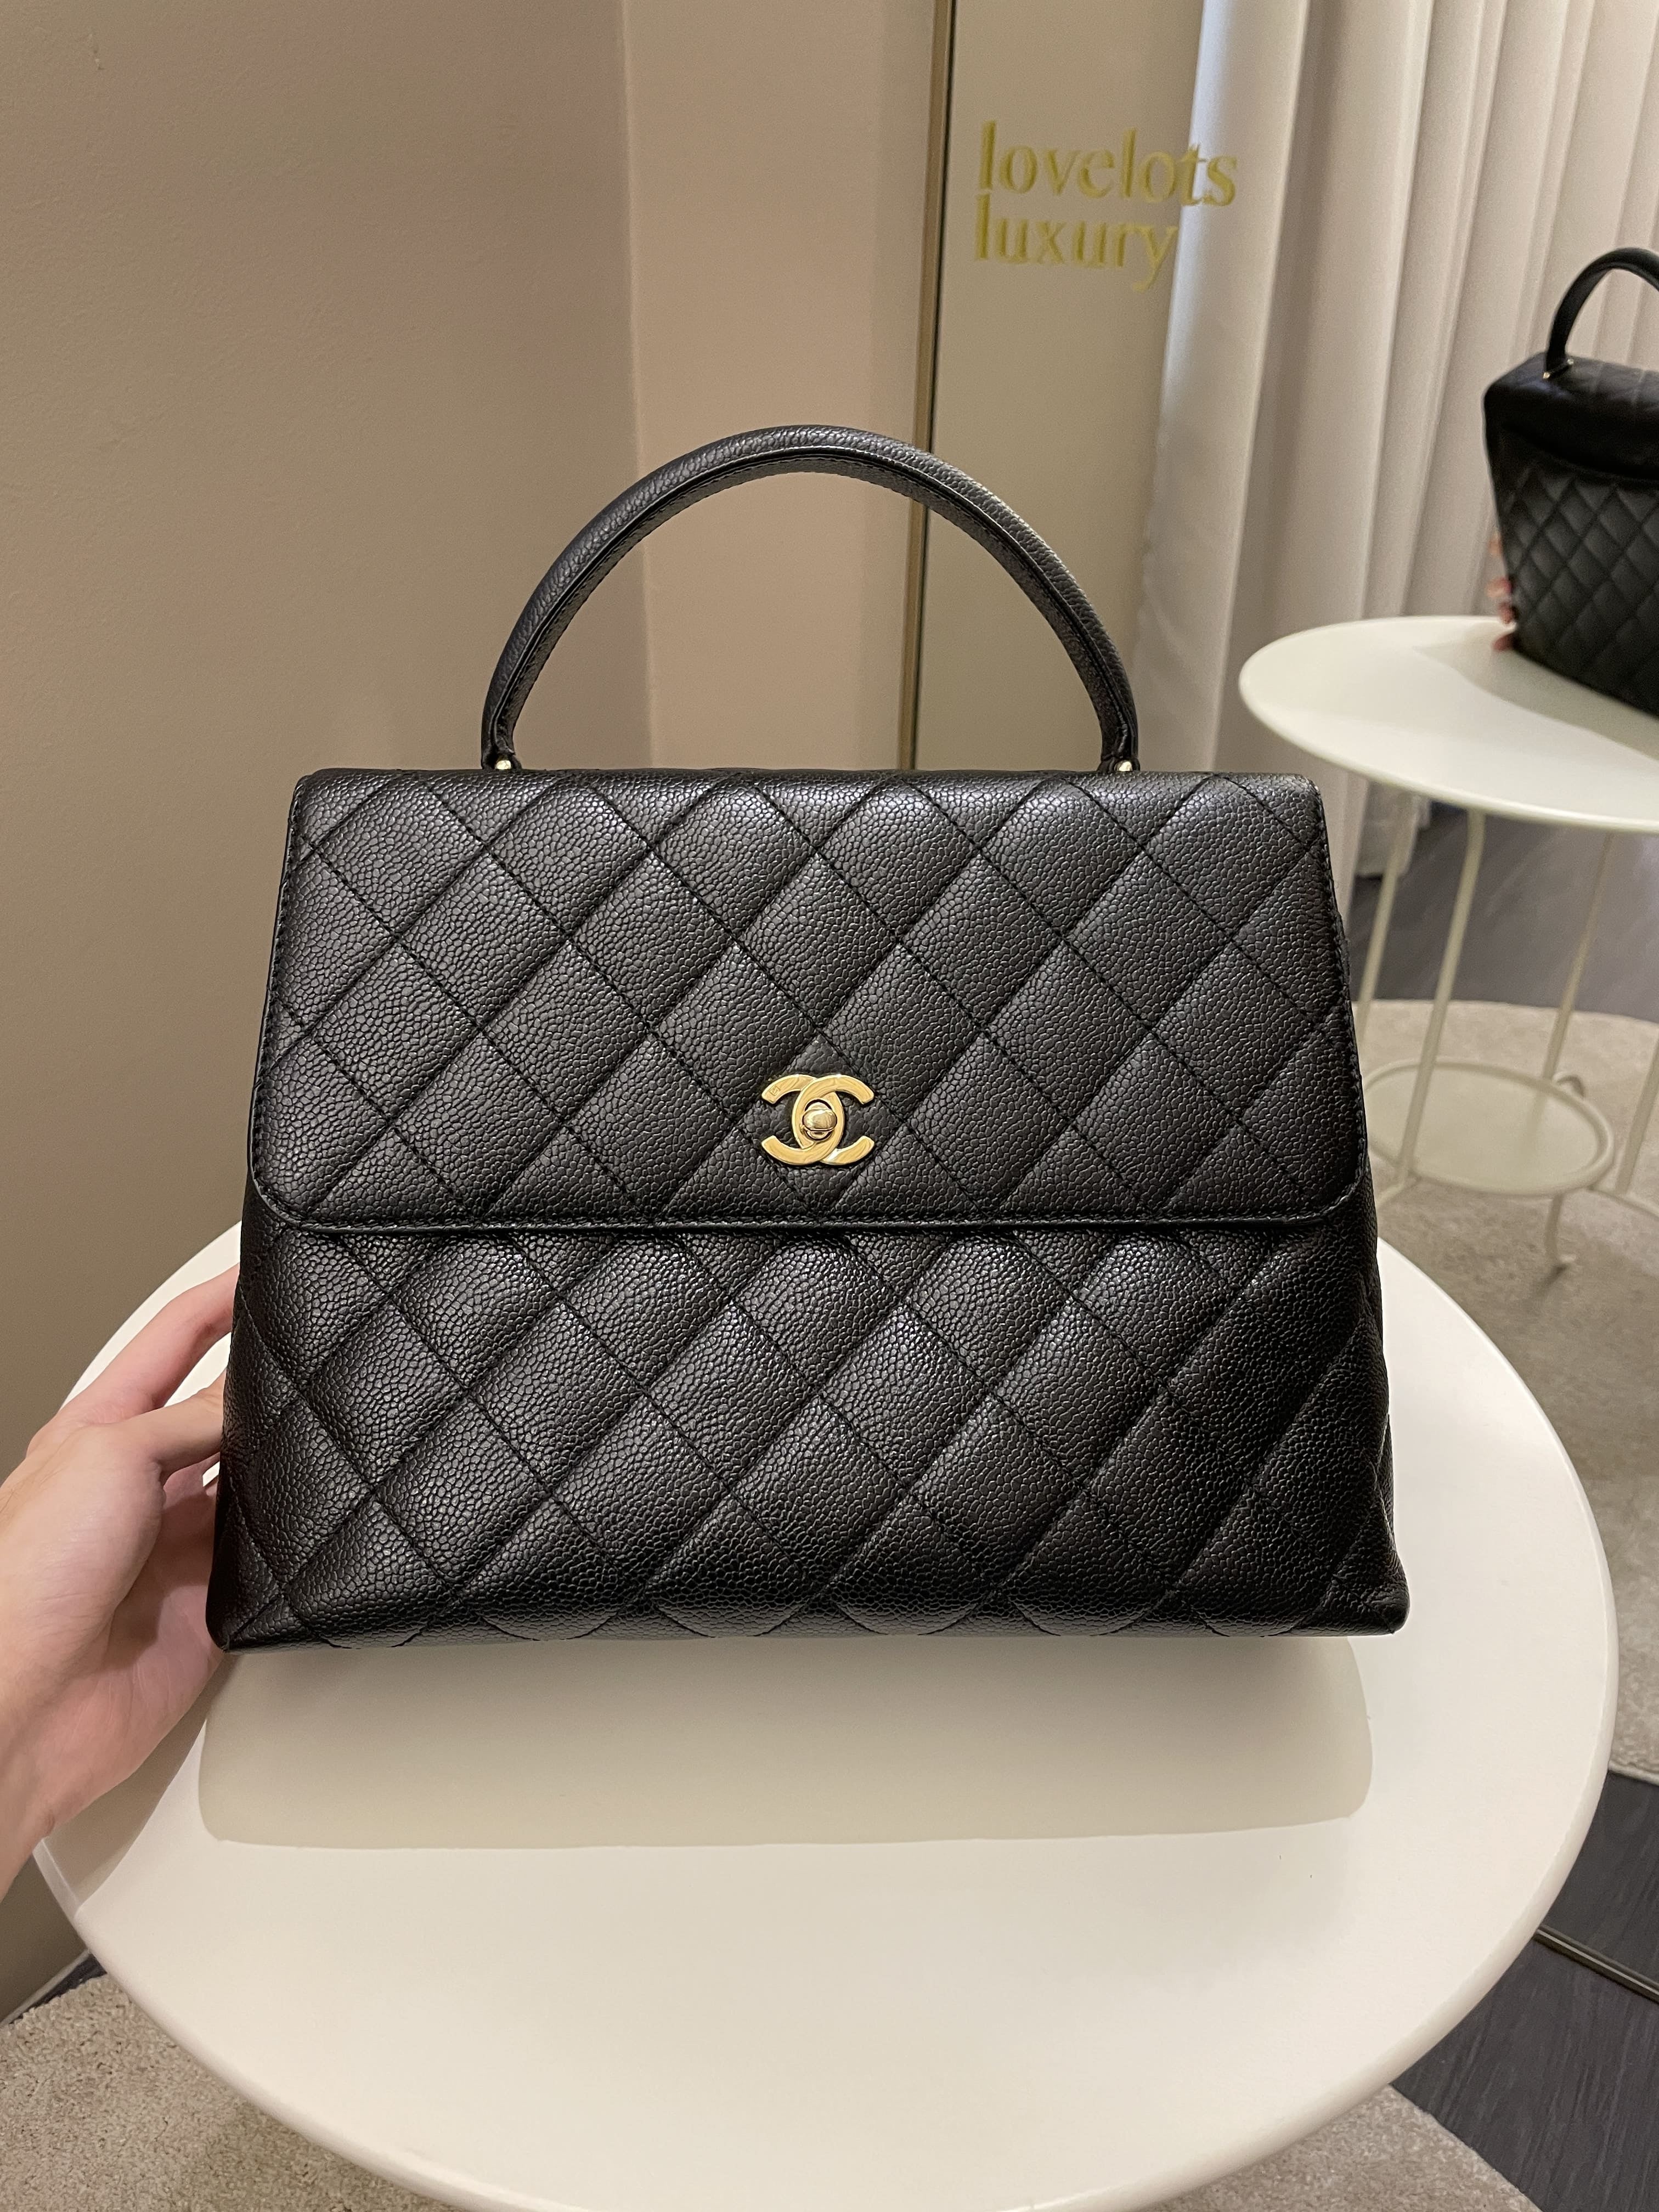 My Review On The Chanel Caviar Quilted Medium Double Flap Handbag